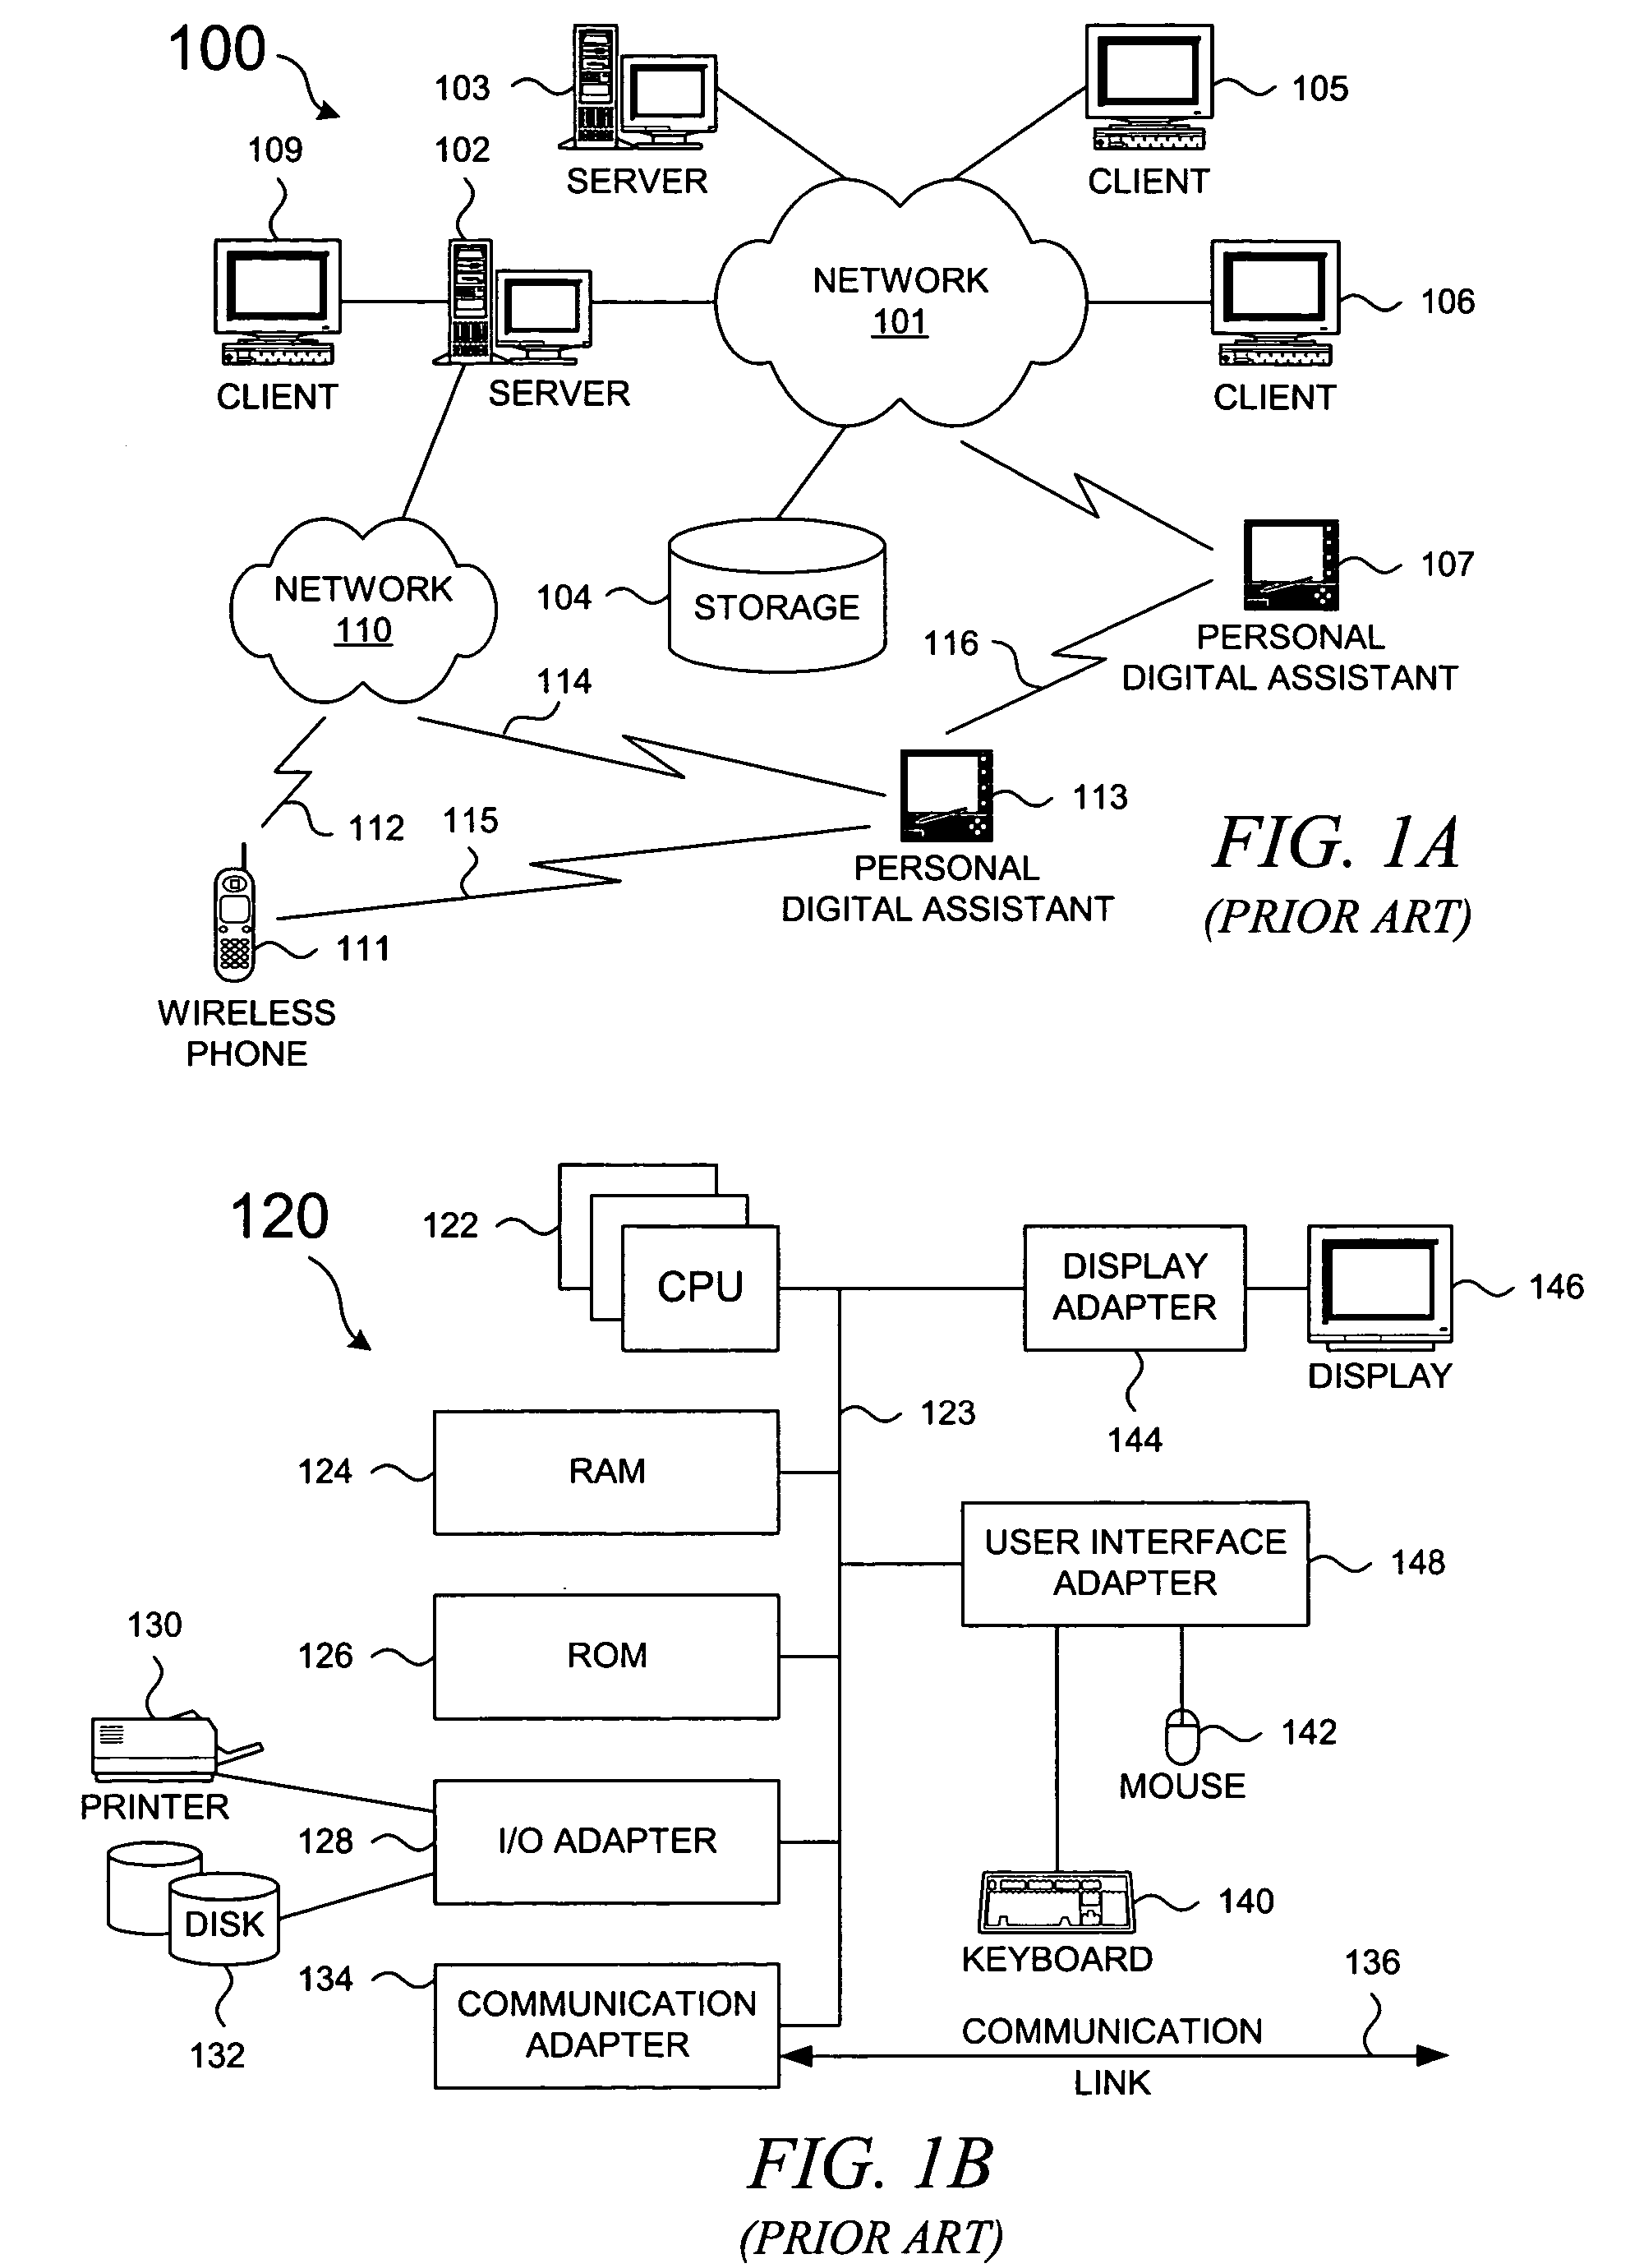 Method and system for protecting master secrets using smart key devices